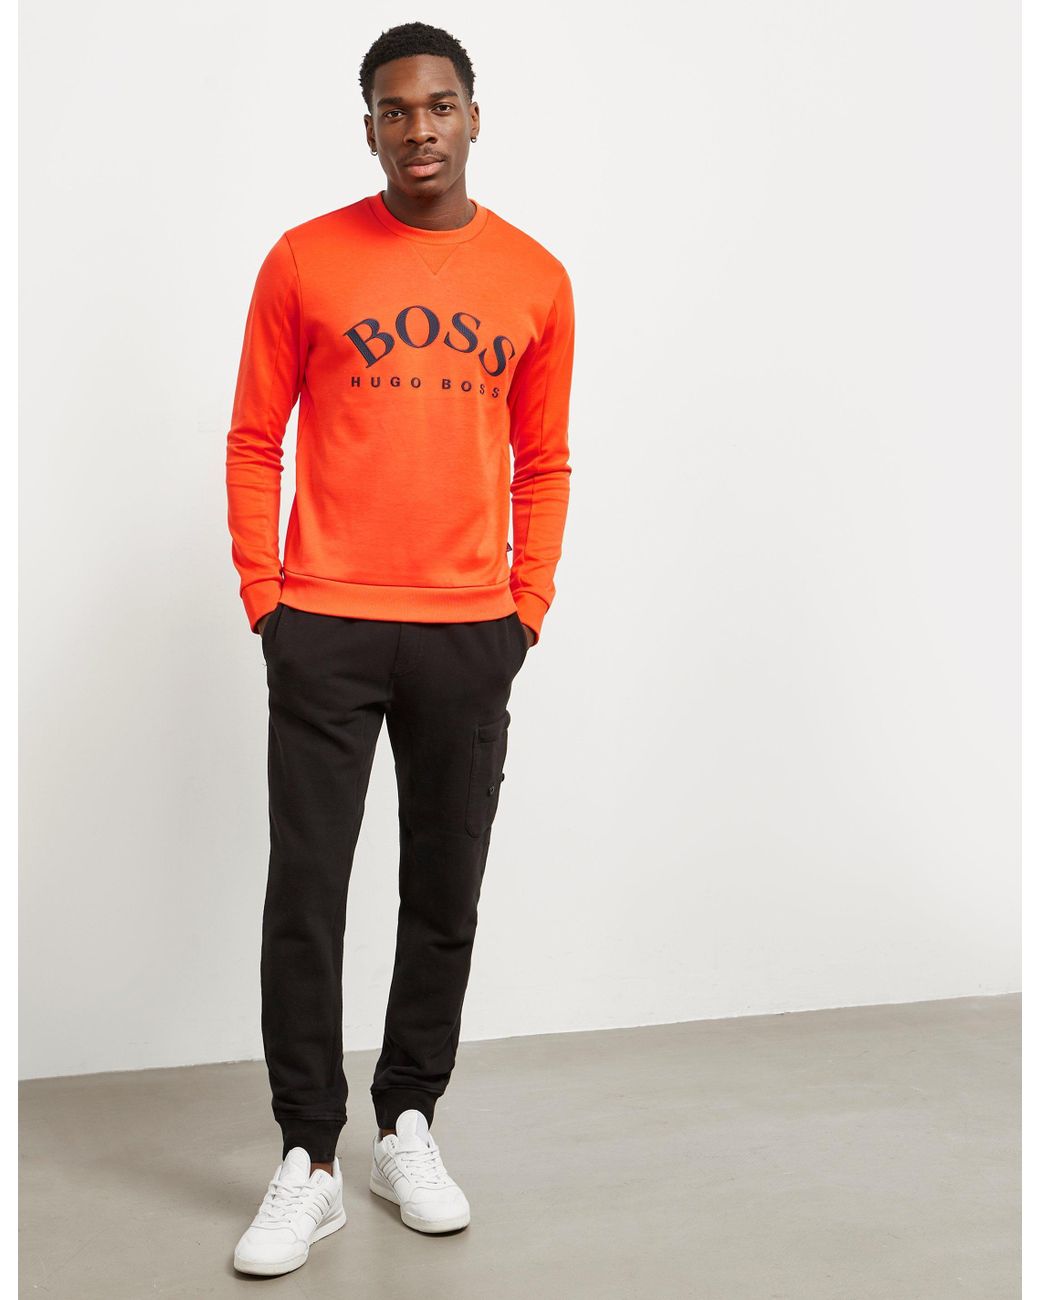 boss green salbo sweatshirt Cheaper Than Retail Price> Clothing, Accessories lifestyle products for women & men -